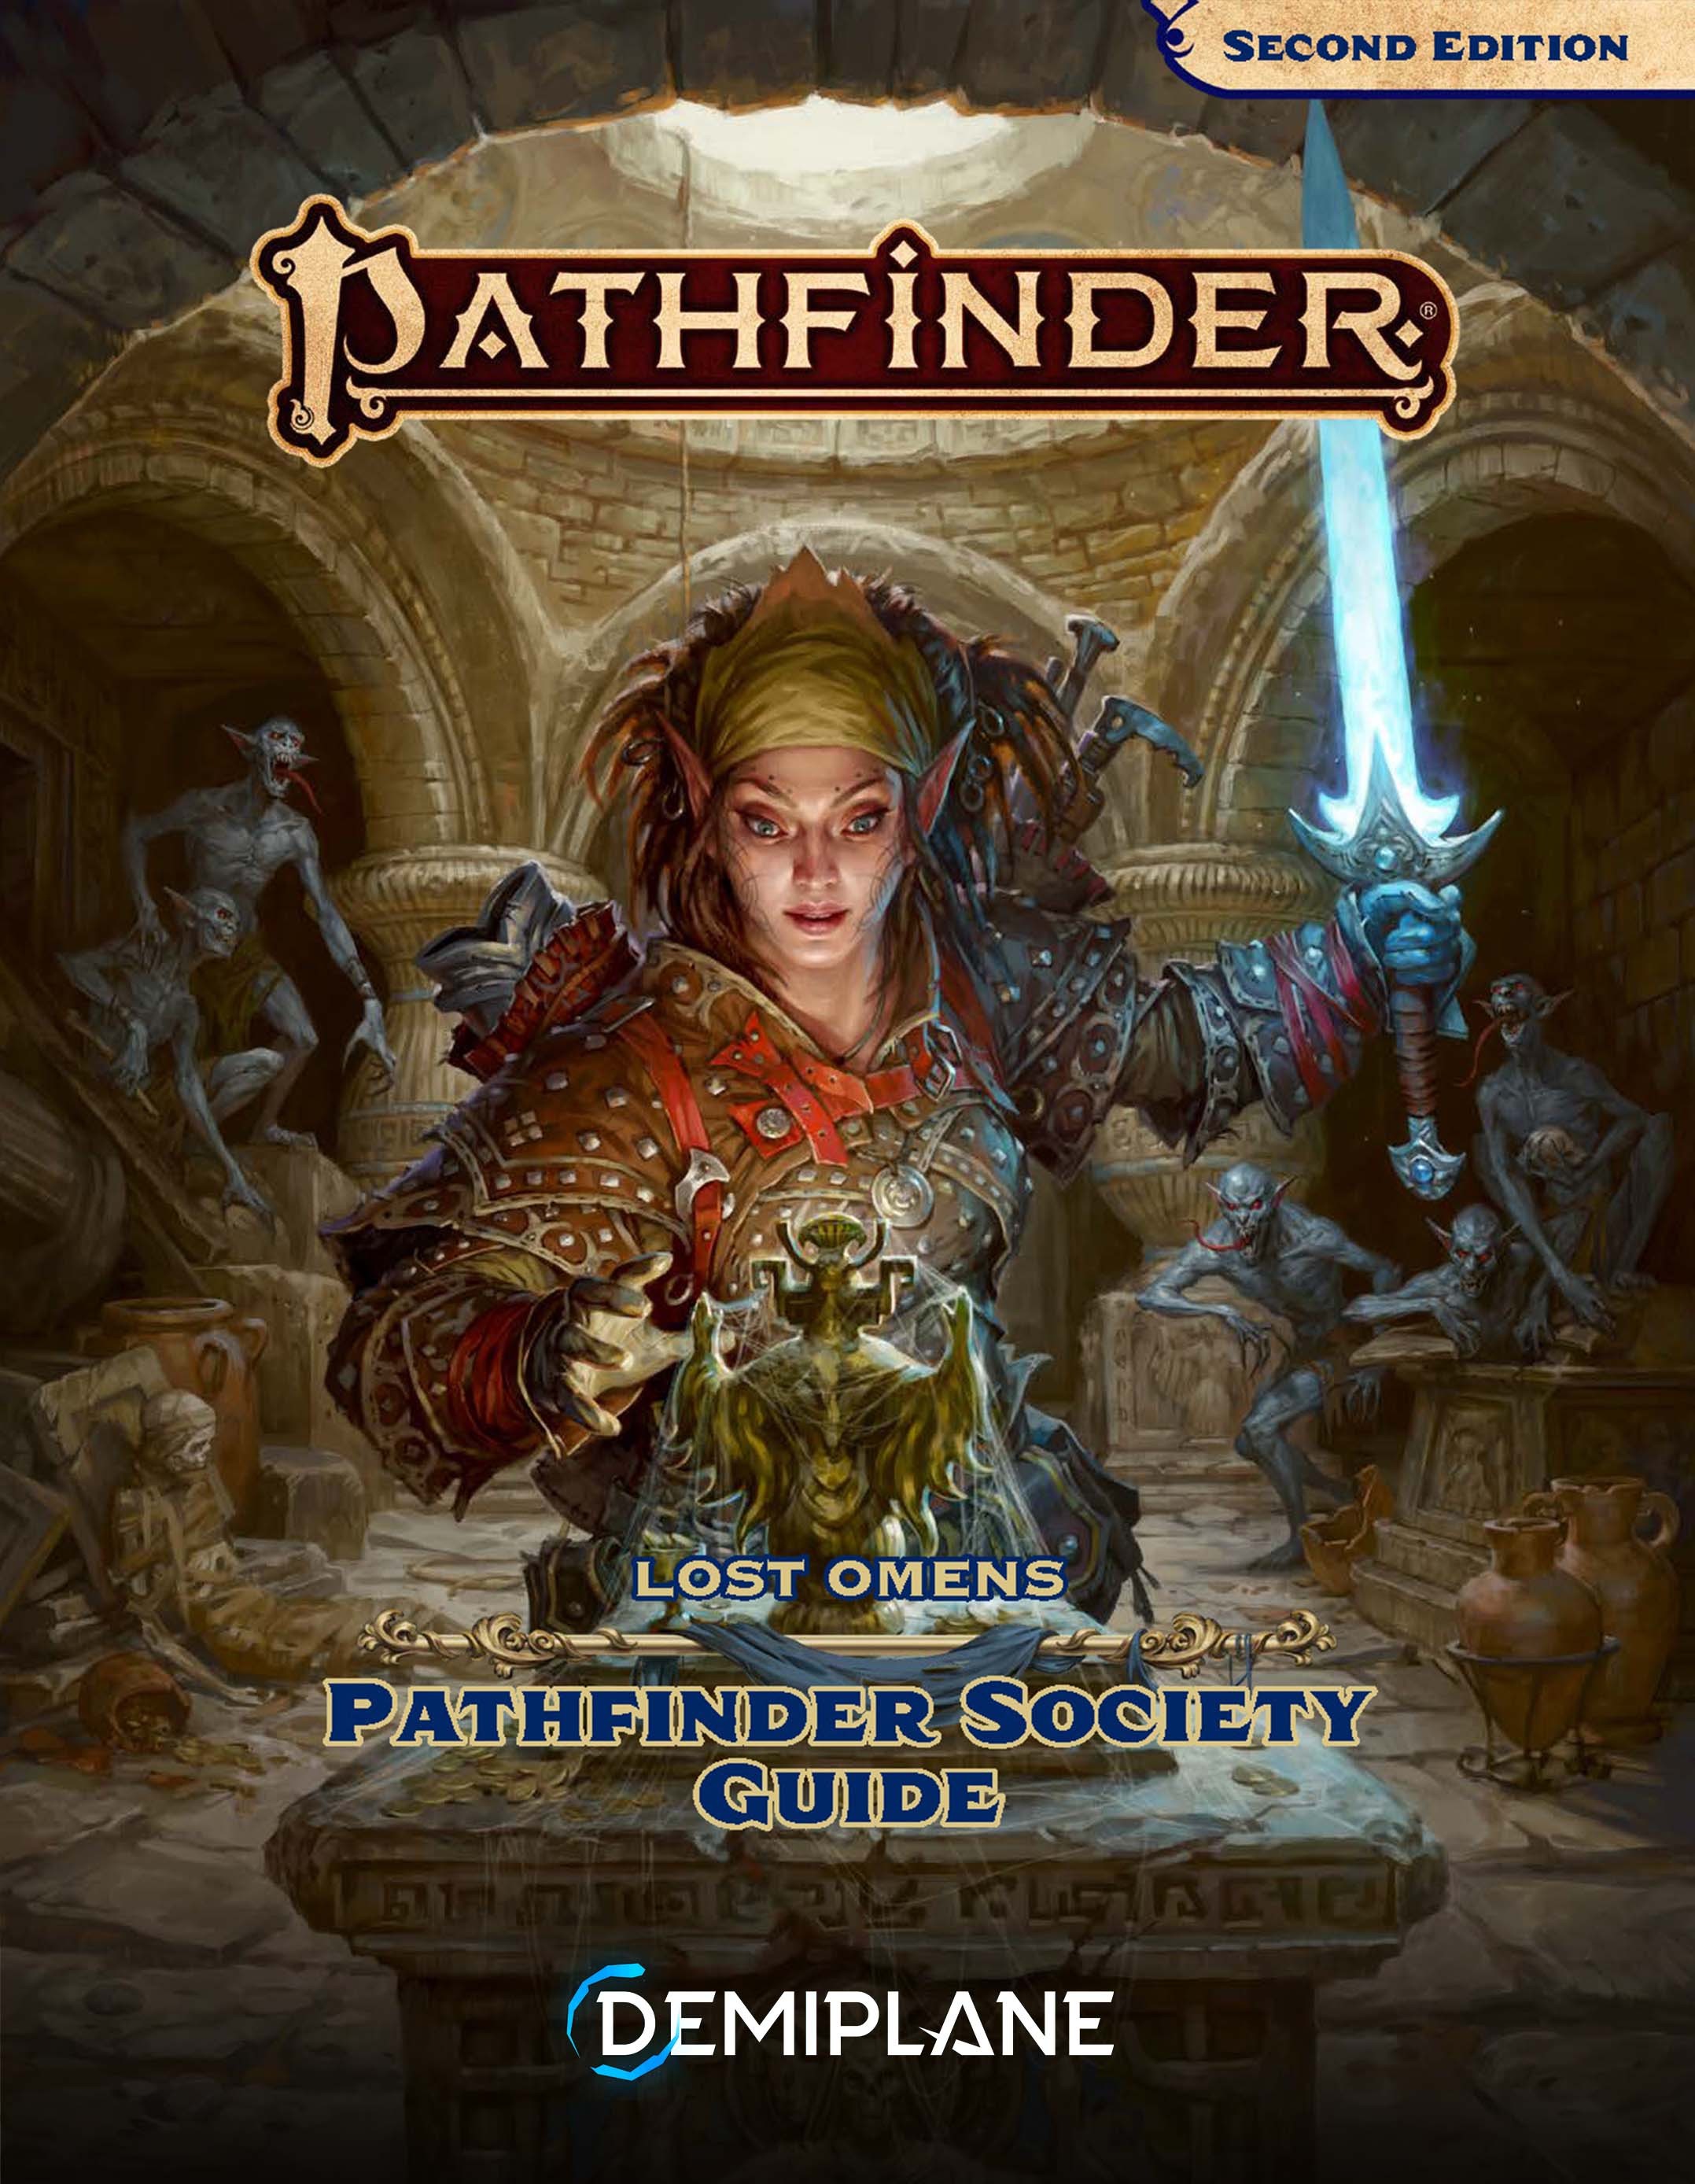 Lost Omens: Pathfinder Society Guide